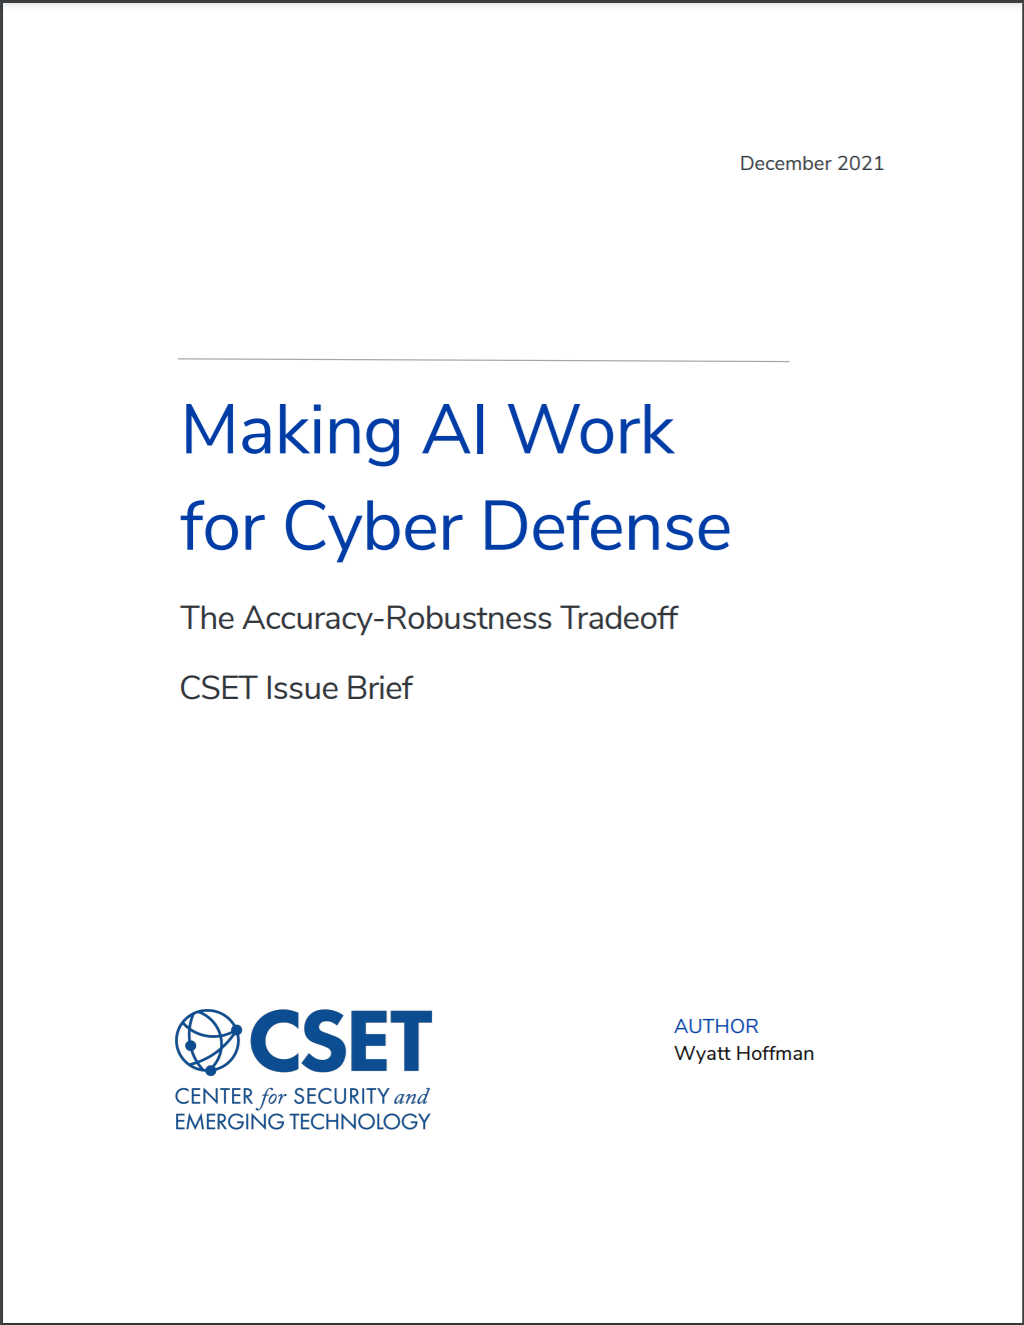 Making AI Work for Cyber Defense